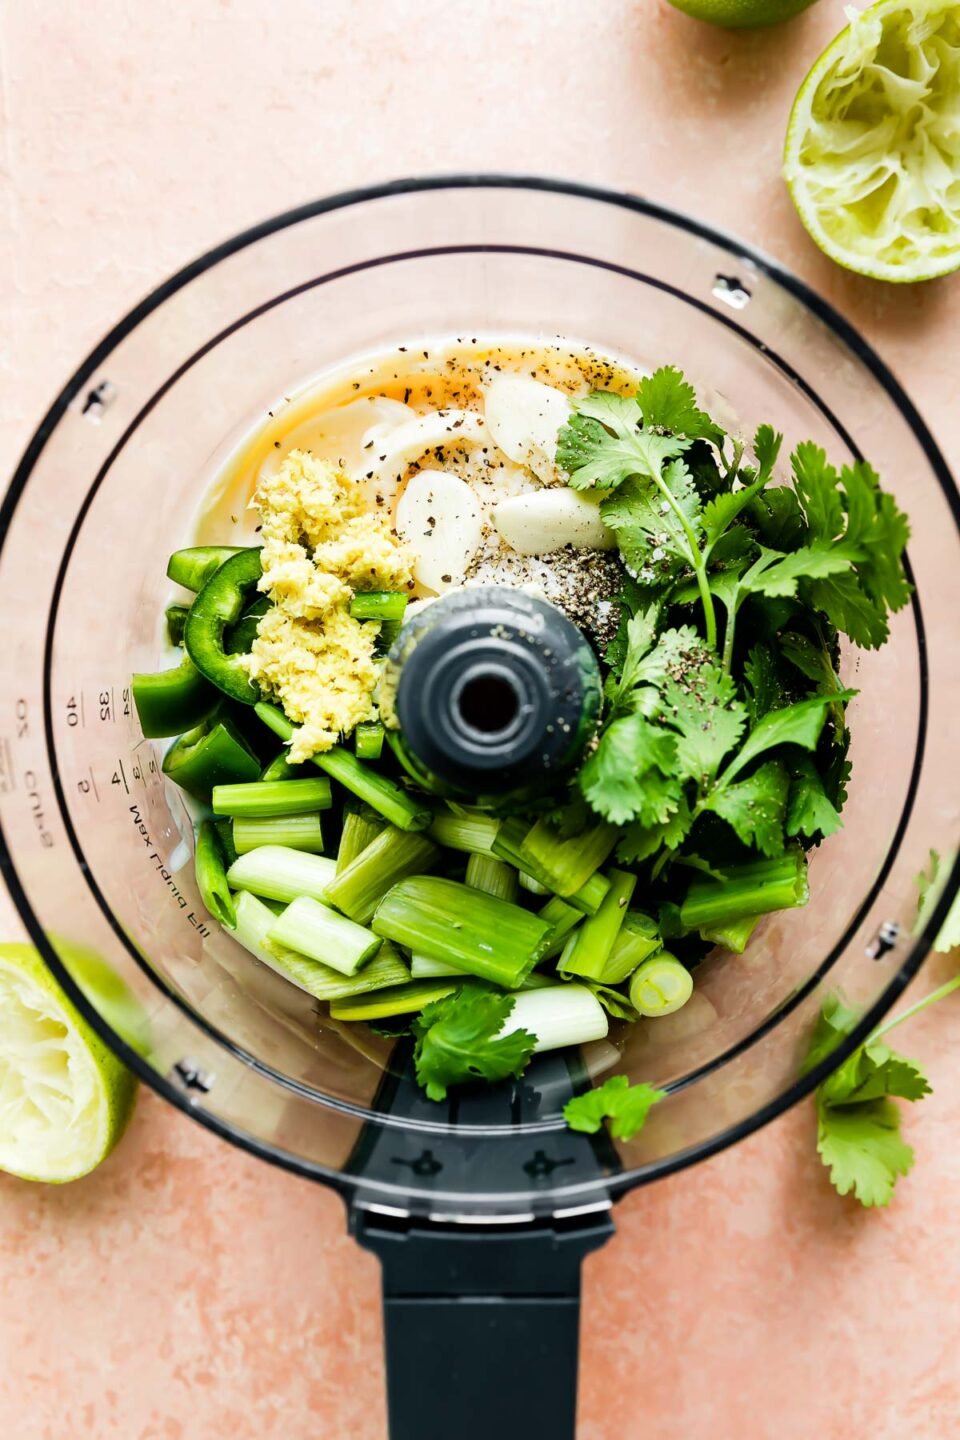 Green sauce ingredients fill a food processor bowl that sits atop a light pink textured surface: mayonnaise, buttermilk, lime juice, cilantro, jalapeno, fresh ginger, green onions, garlic, kosher salt, and ground black pepper. The food processor bowl is surrounded by discarded lime halves.